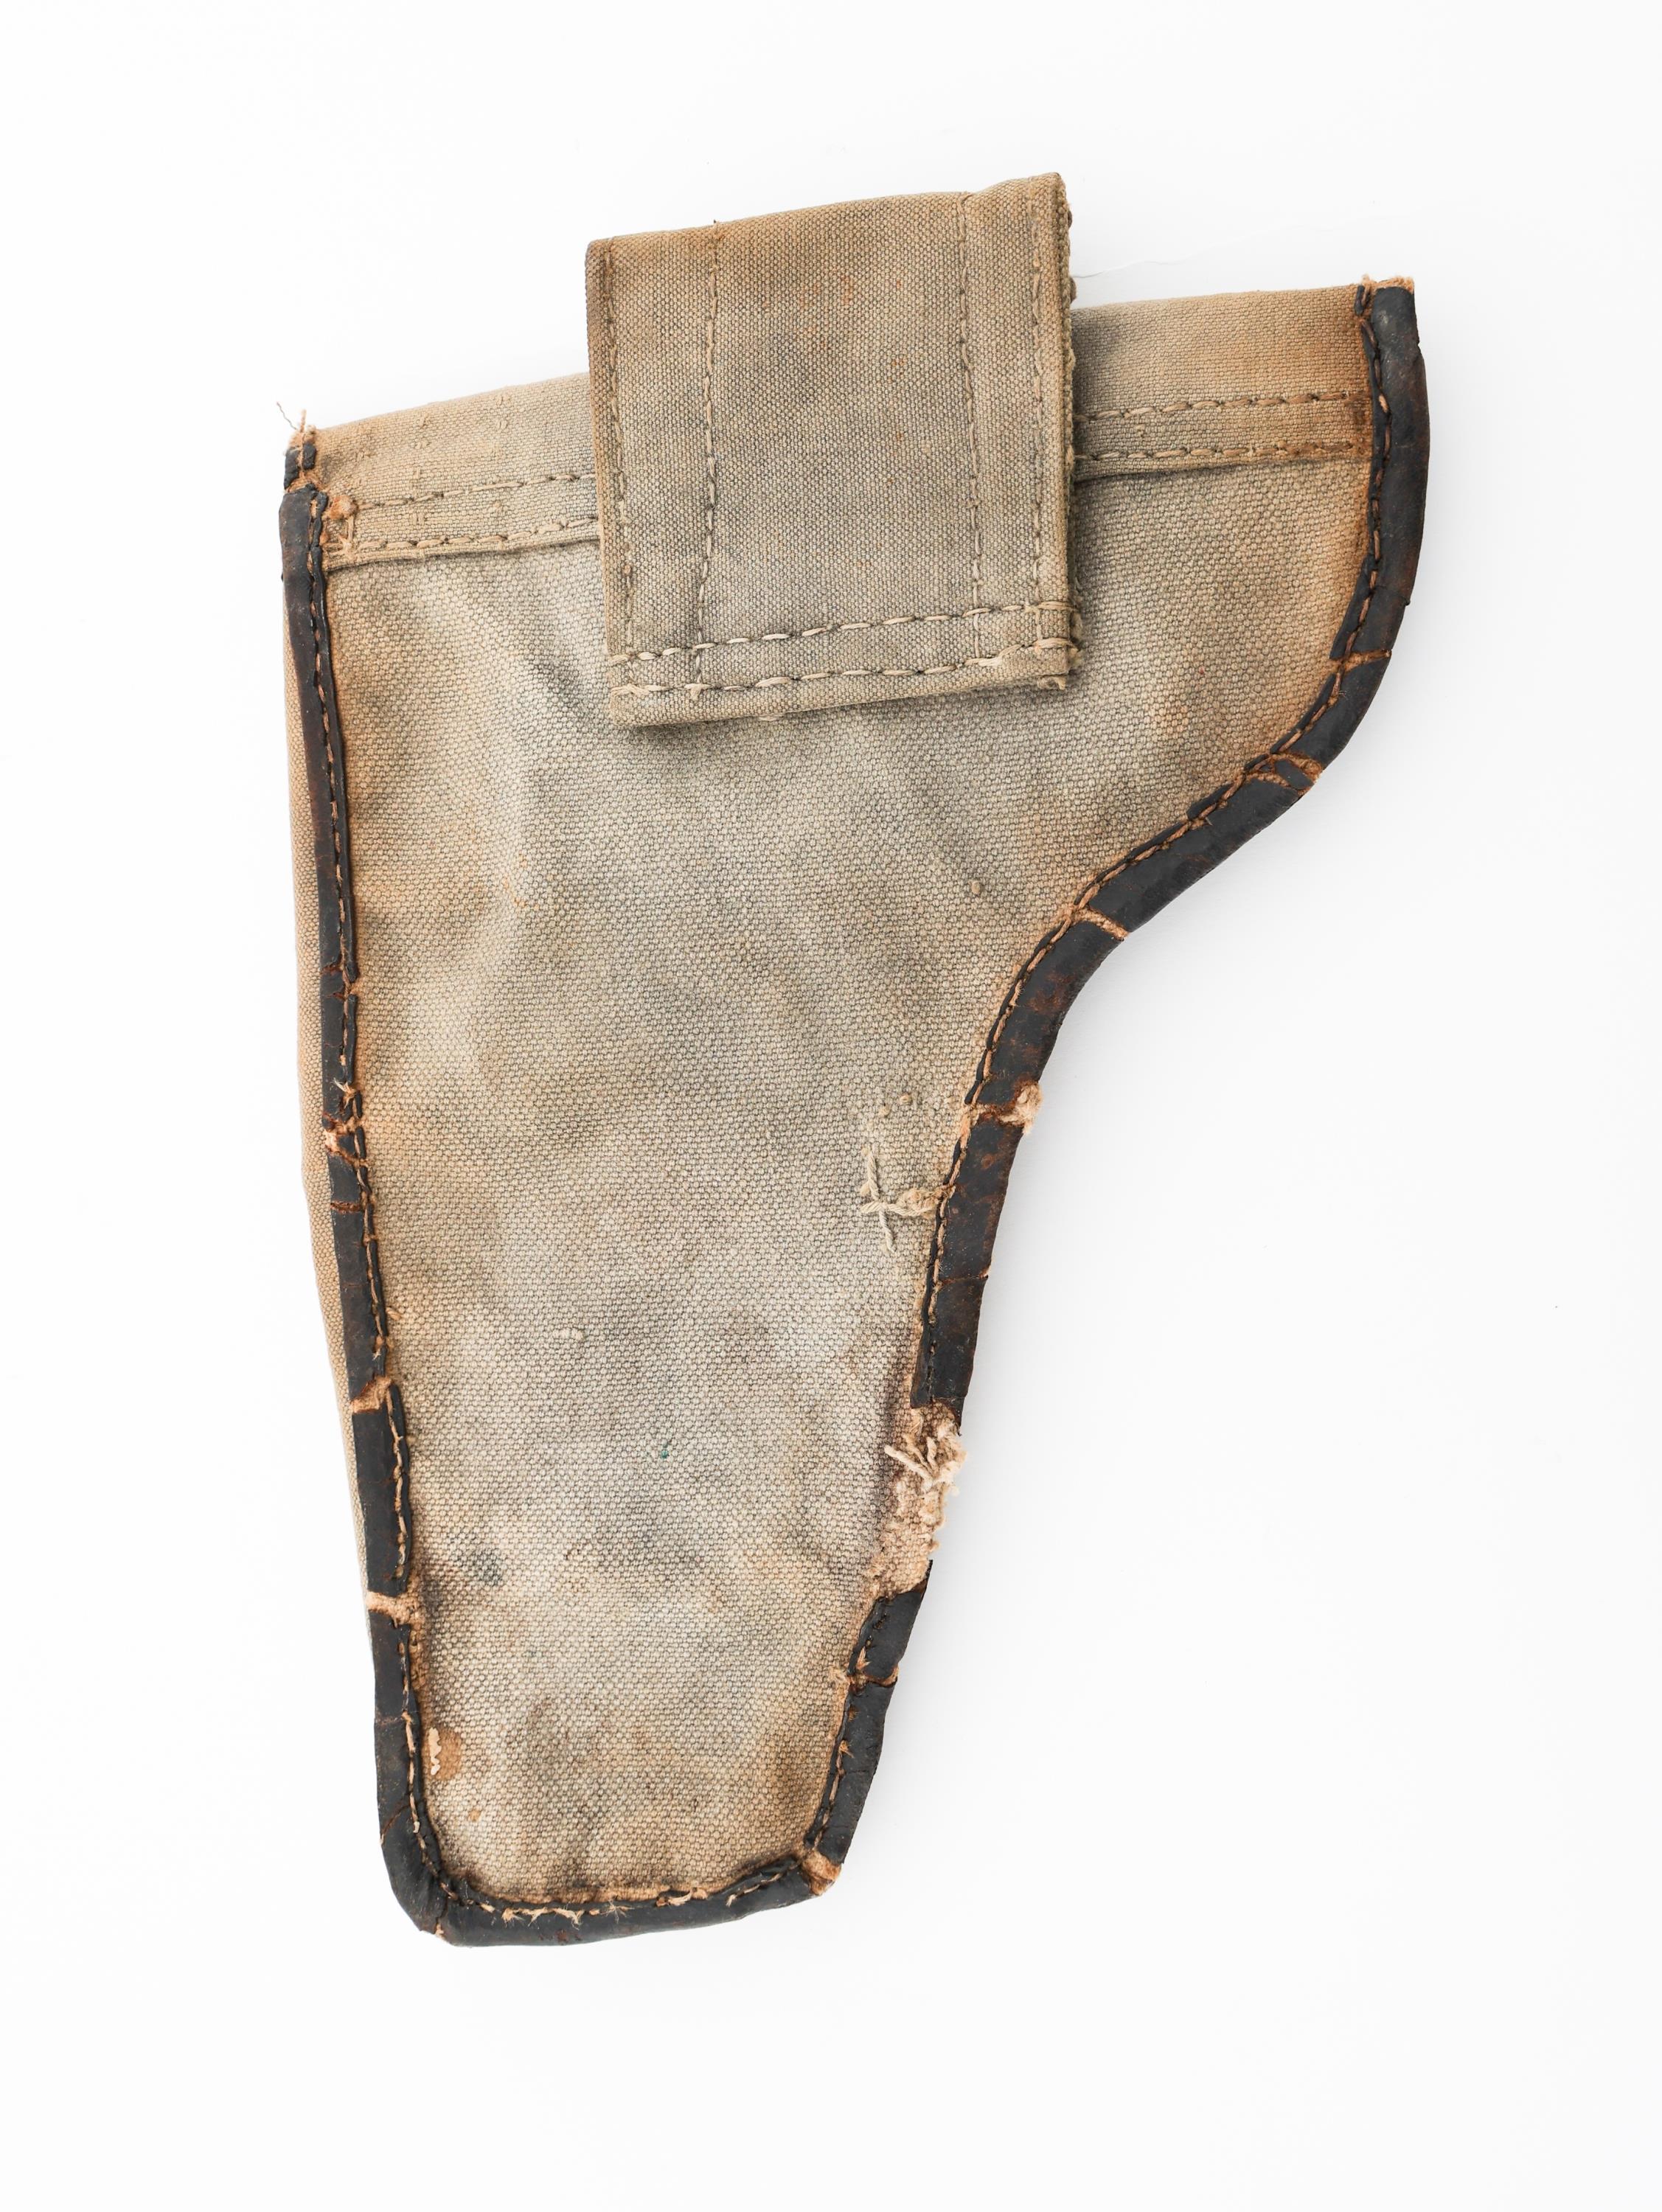 WWII - COLD WAR ERA WORLD MILITARY HOLSTERS